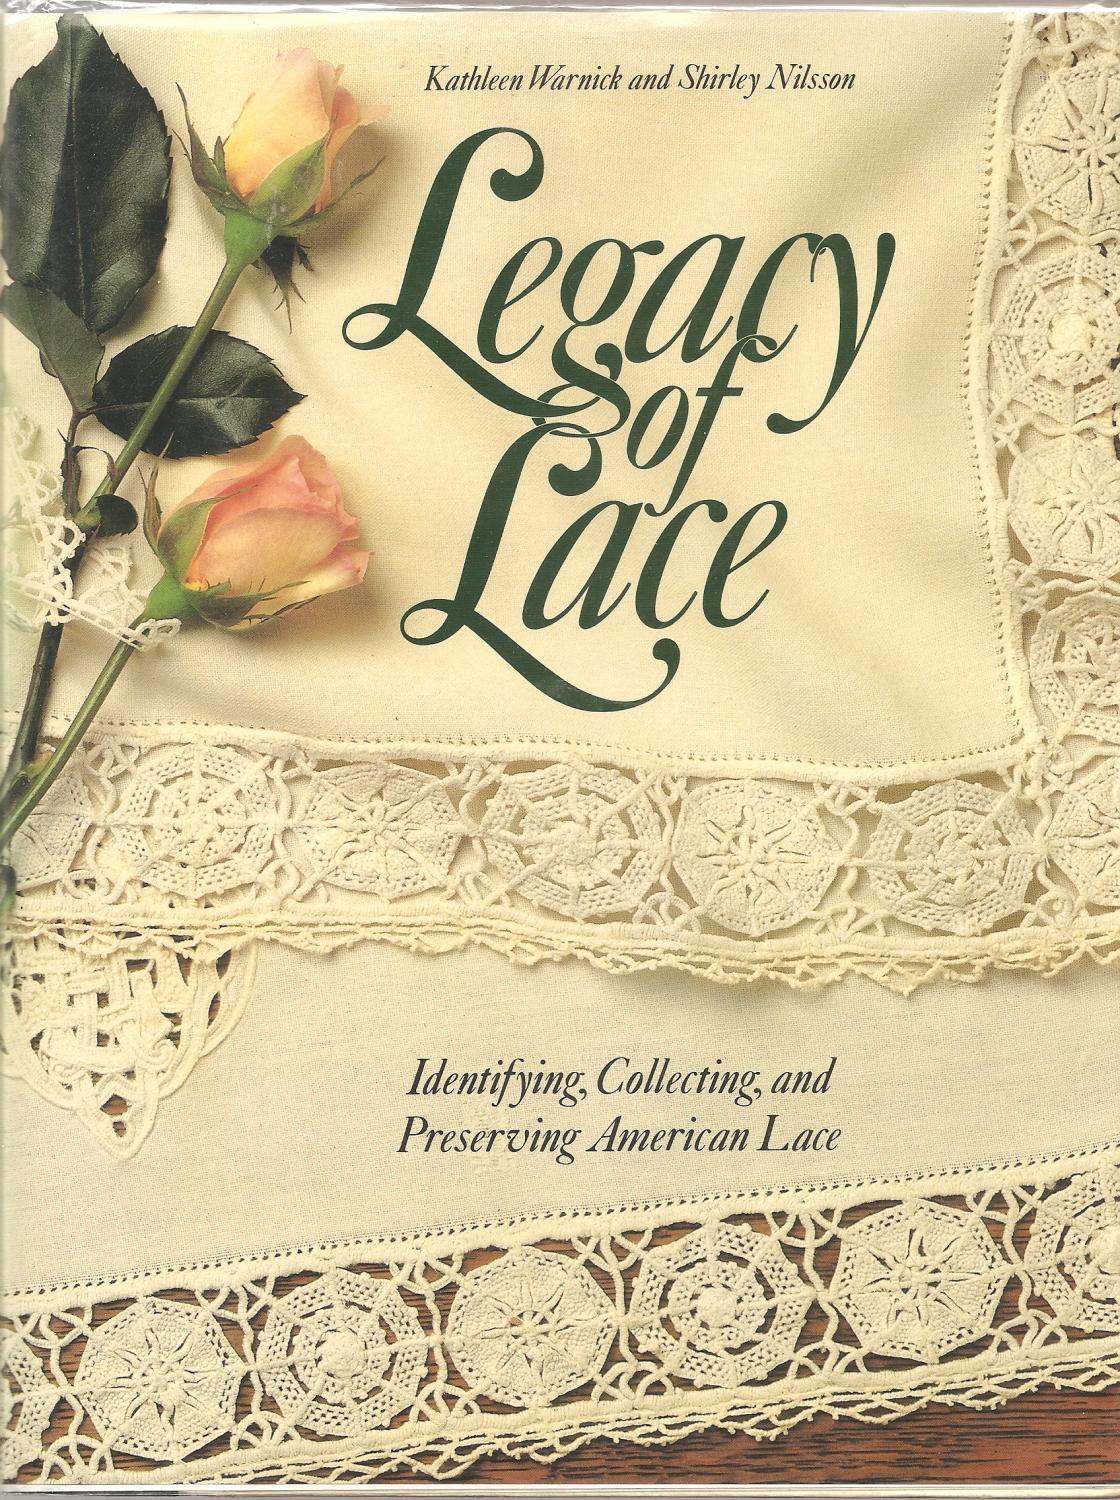 LEGACY OF LACE. Identifying, Collecting, and